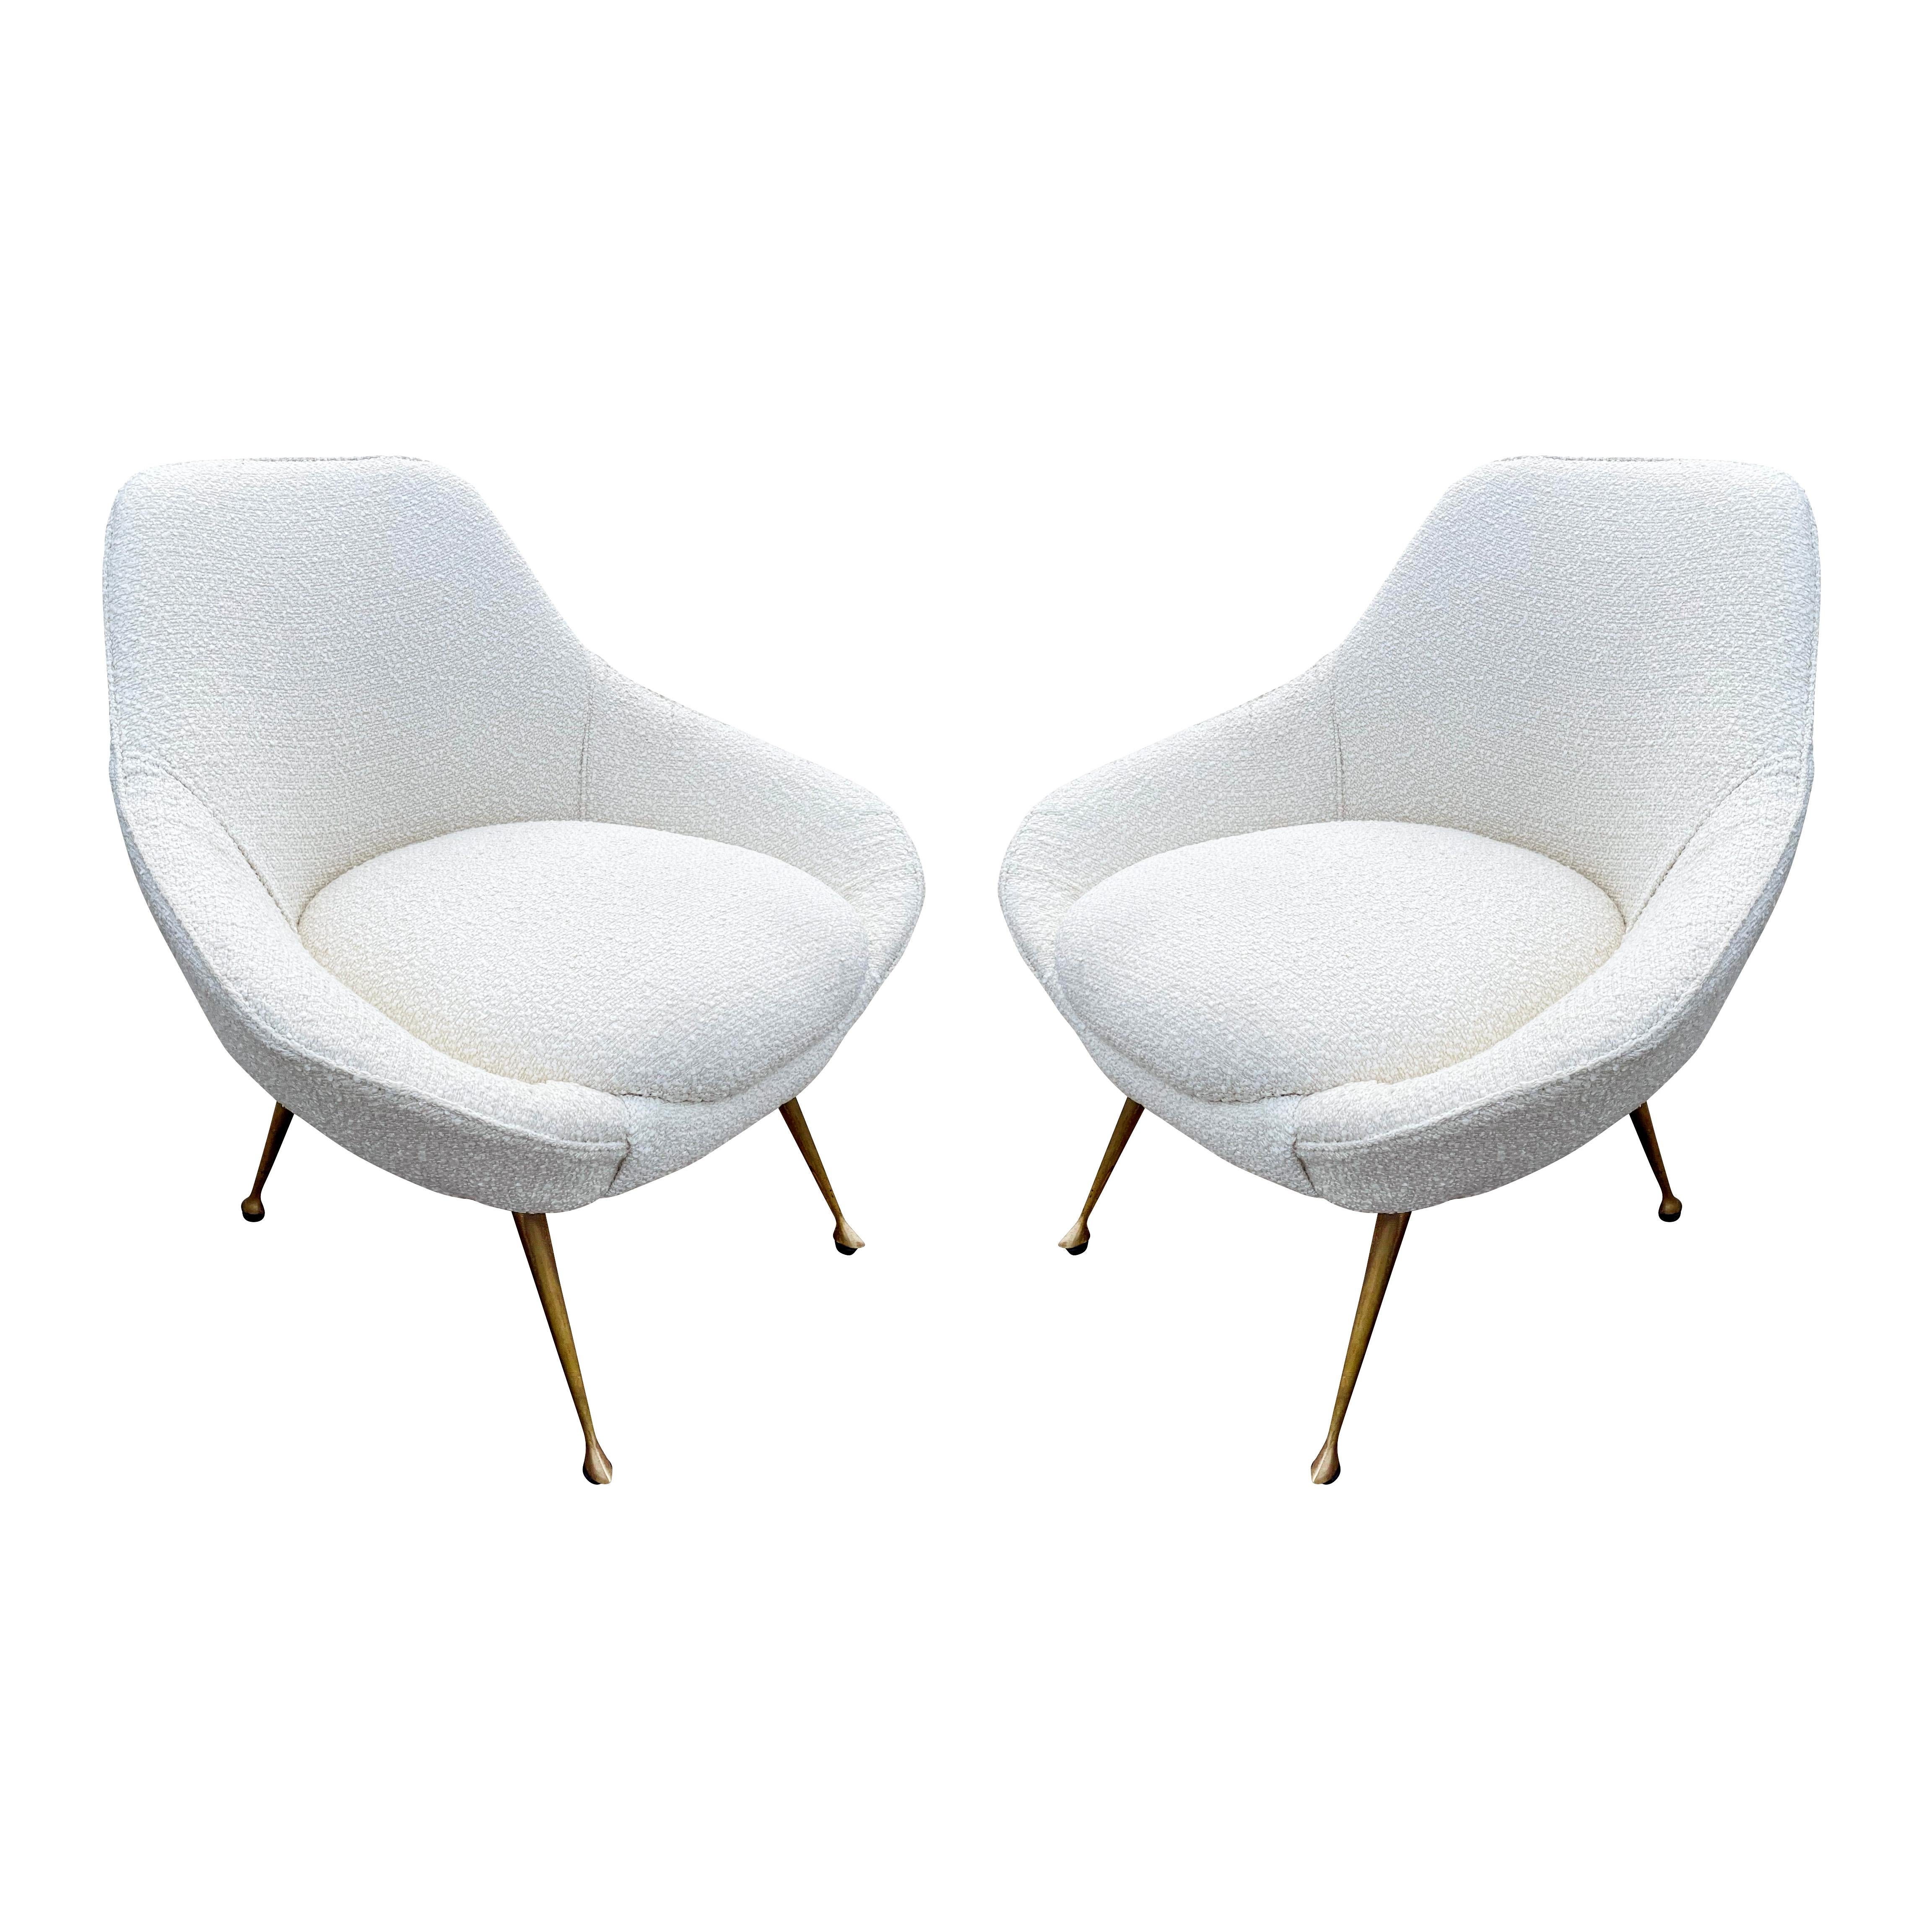 Italian midcentury armchairs with brass legs.
$6,500.00
Italian midcentury armchairs with a wide seat and tapering brass legs. Recovered in a white boucle fabric. Price for the pair-sold individually on request.

Condition: minor wear consistent